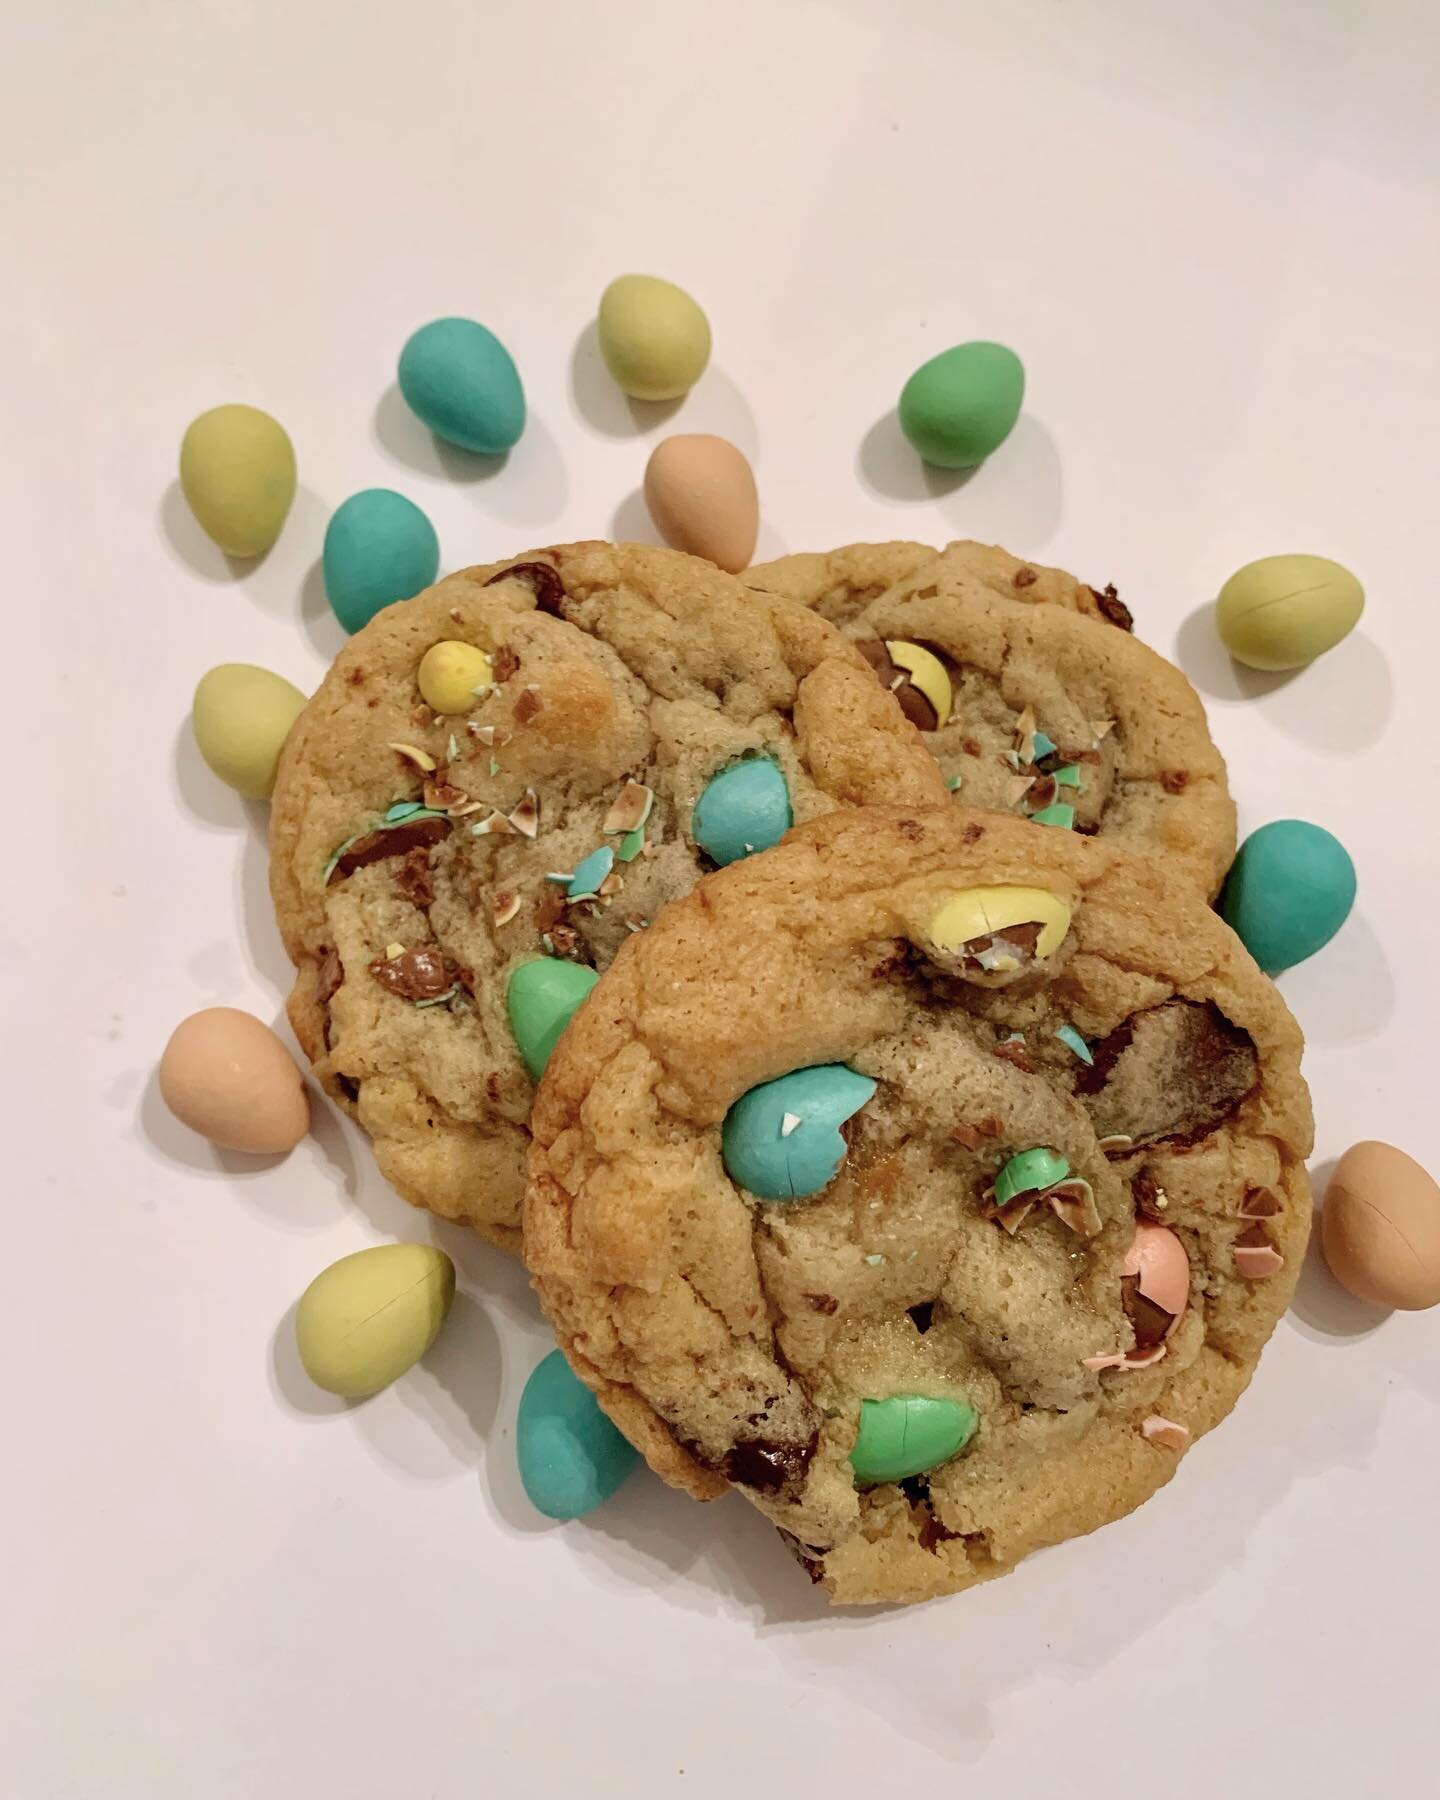 Our Easter specials are LIVE! 
⭐️ Mini Egg Cookies 
⭐️ Mini Egg Brownies 
⭐️ Mini Egg Chocolate Chunk Pizza 
Order to reserve your Easter treats! Send us a DM or head to the website. 
🤍 GF options available.